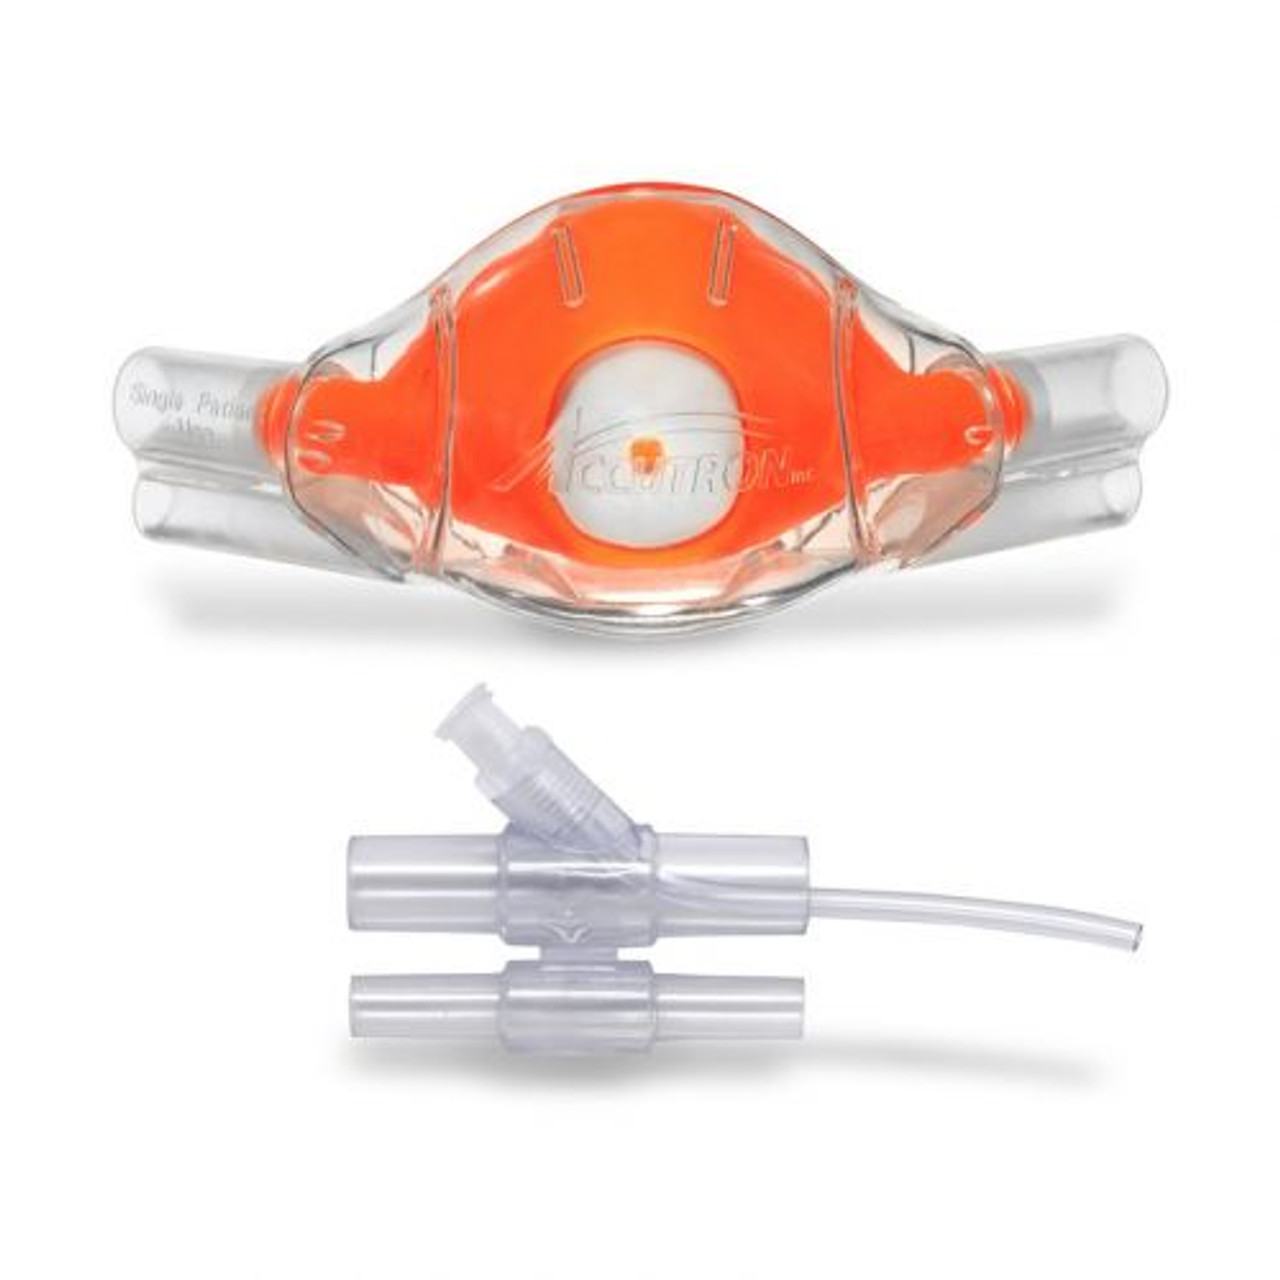 Crosstex Accutron Clearview Nasal Masks and Capnography Bundle, Adult, Outlaw Orange, 12/pk